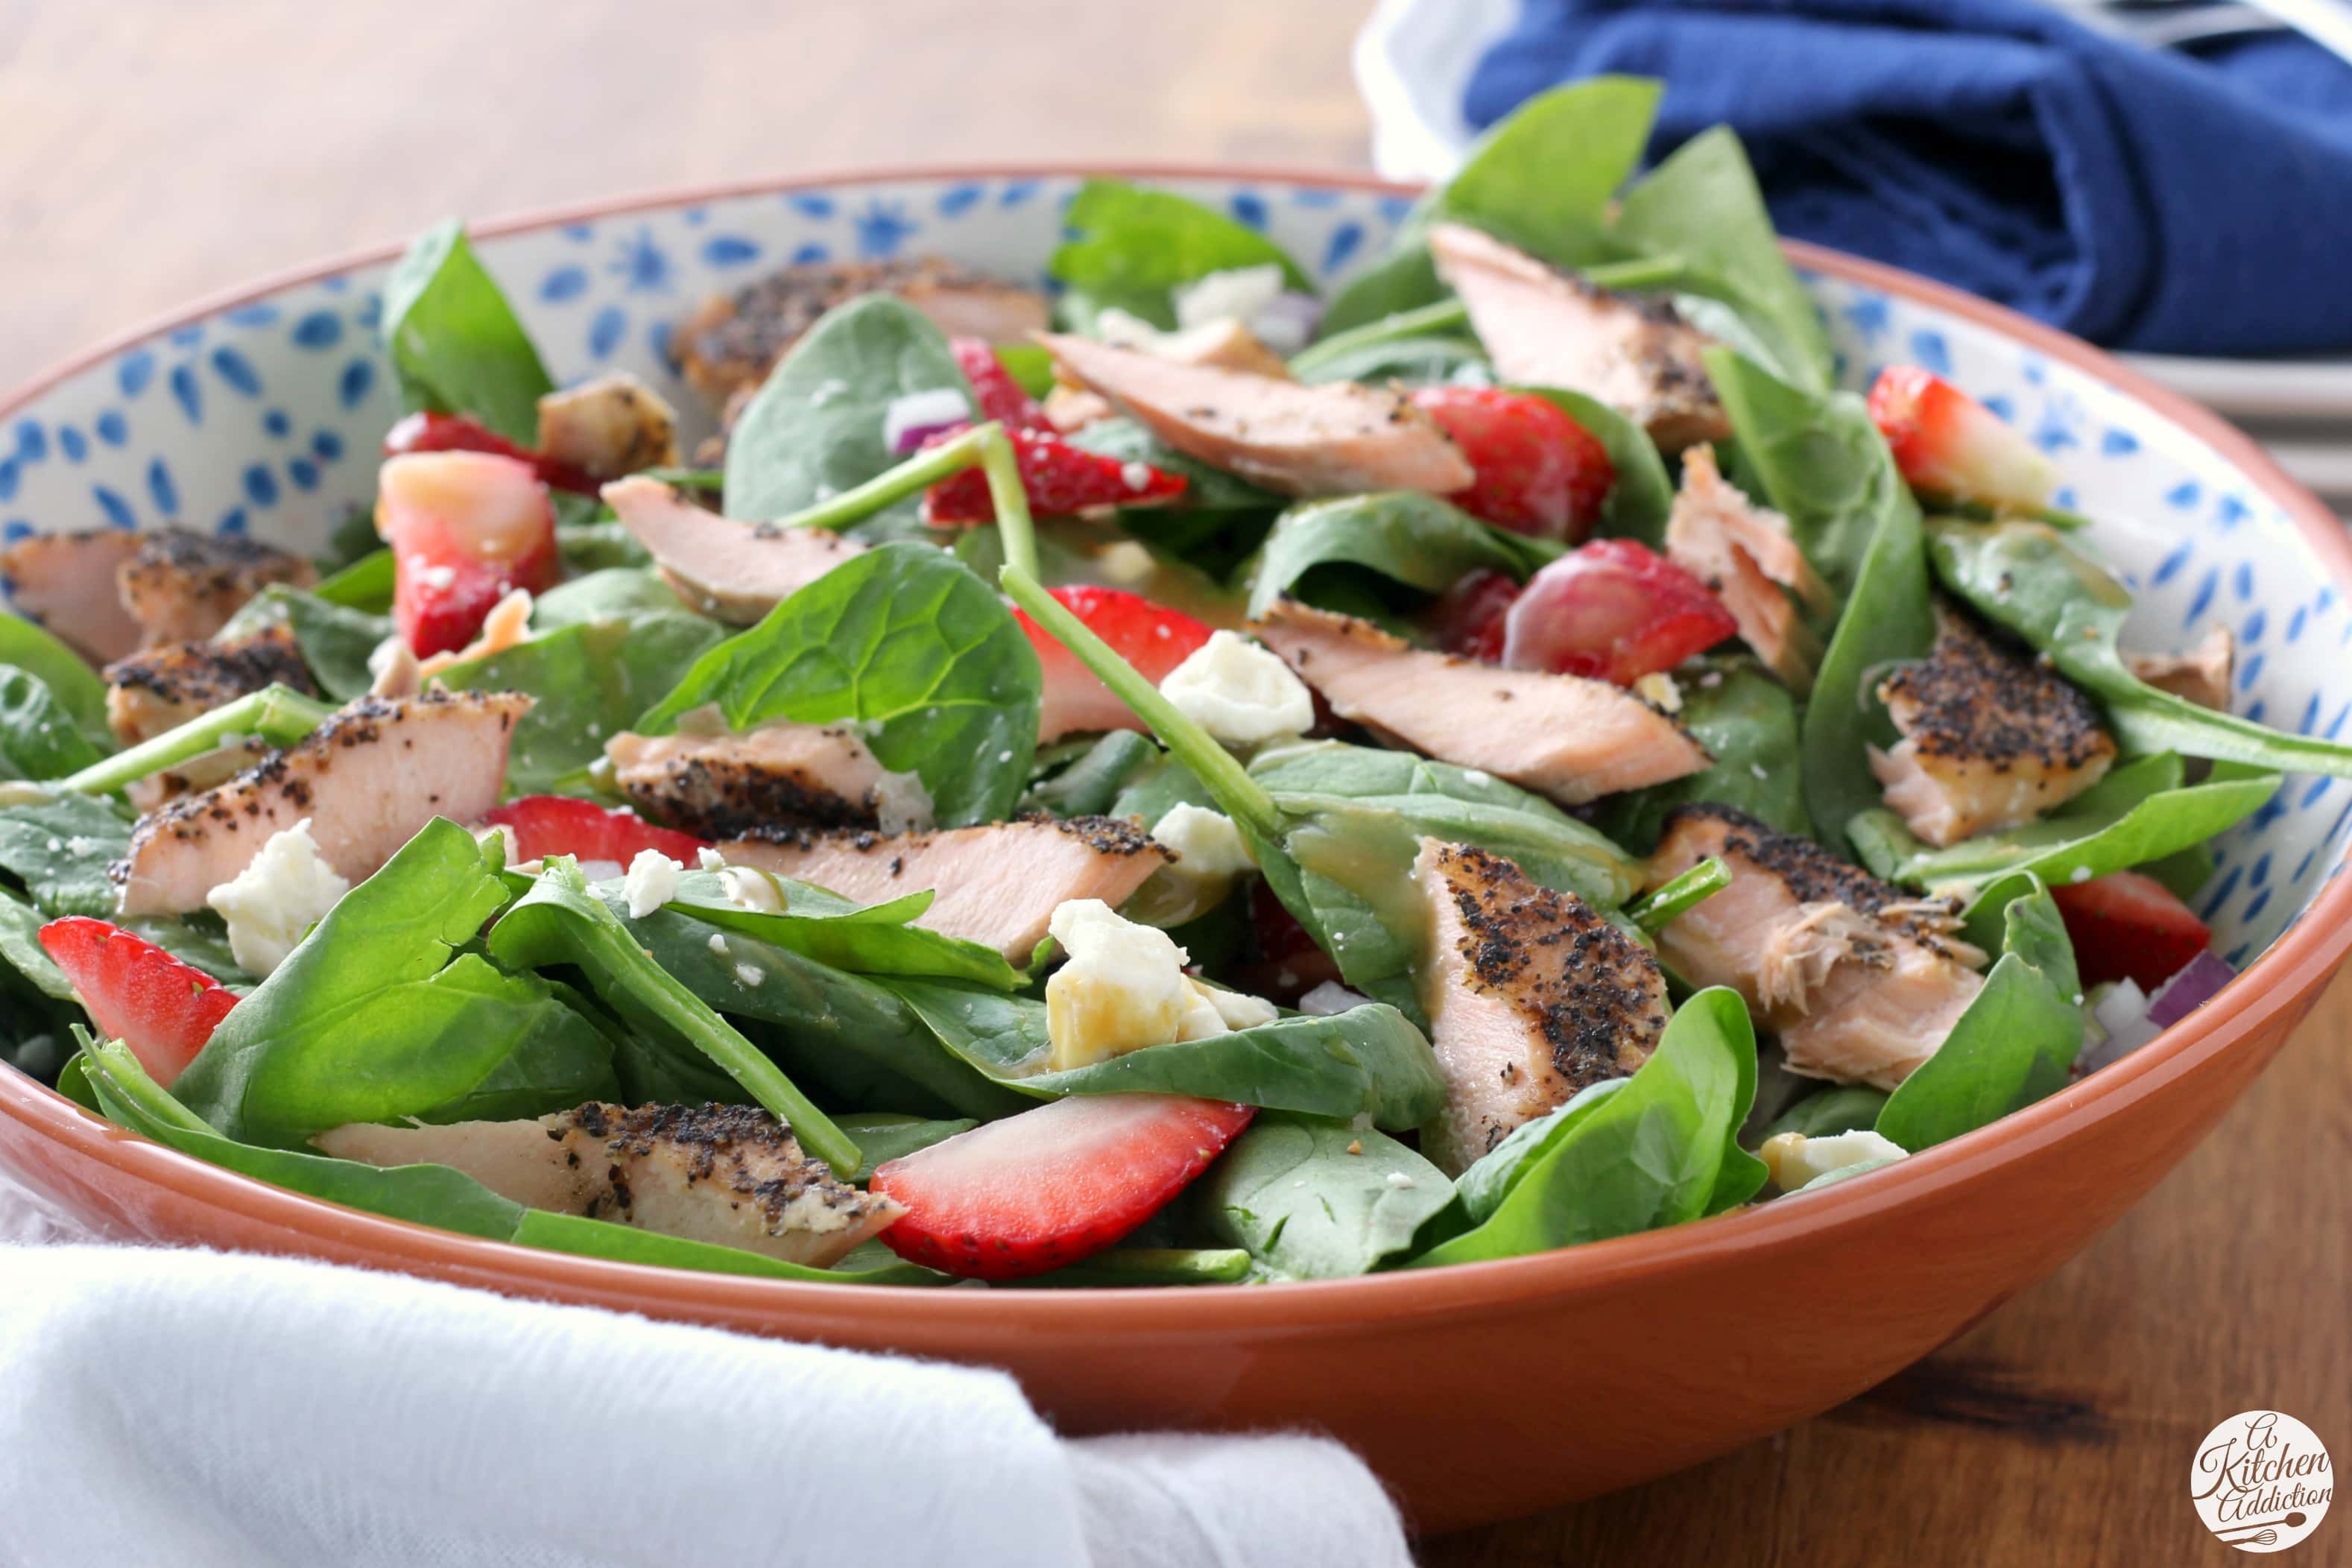 Baked Salmon Strawberry Spinach Salad with Honey Dijon Vinaigrette Recipe from A Kitchen Addiction